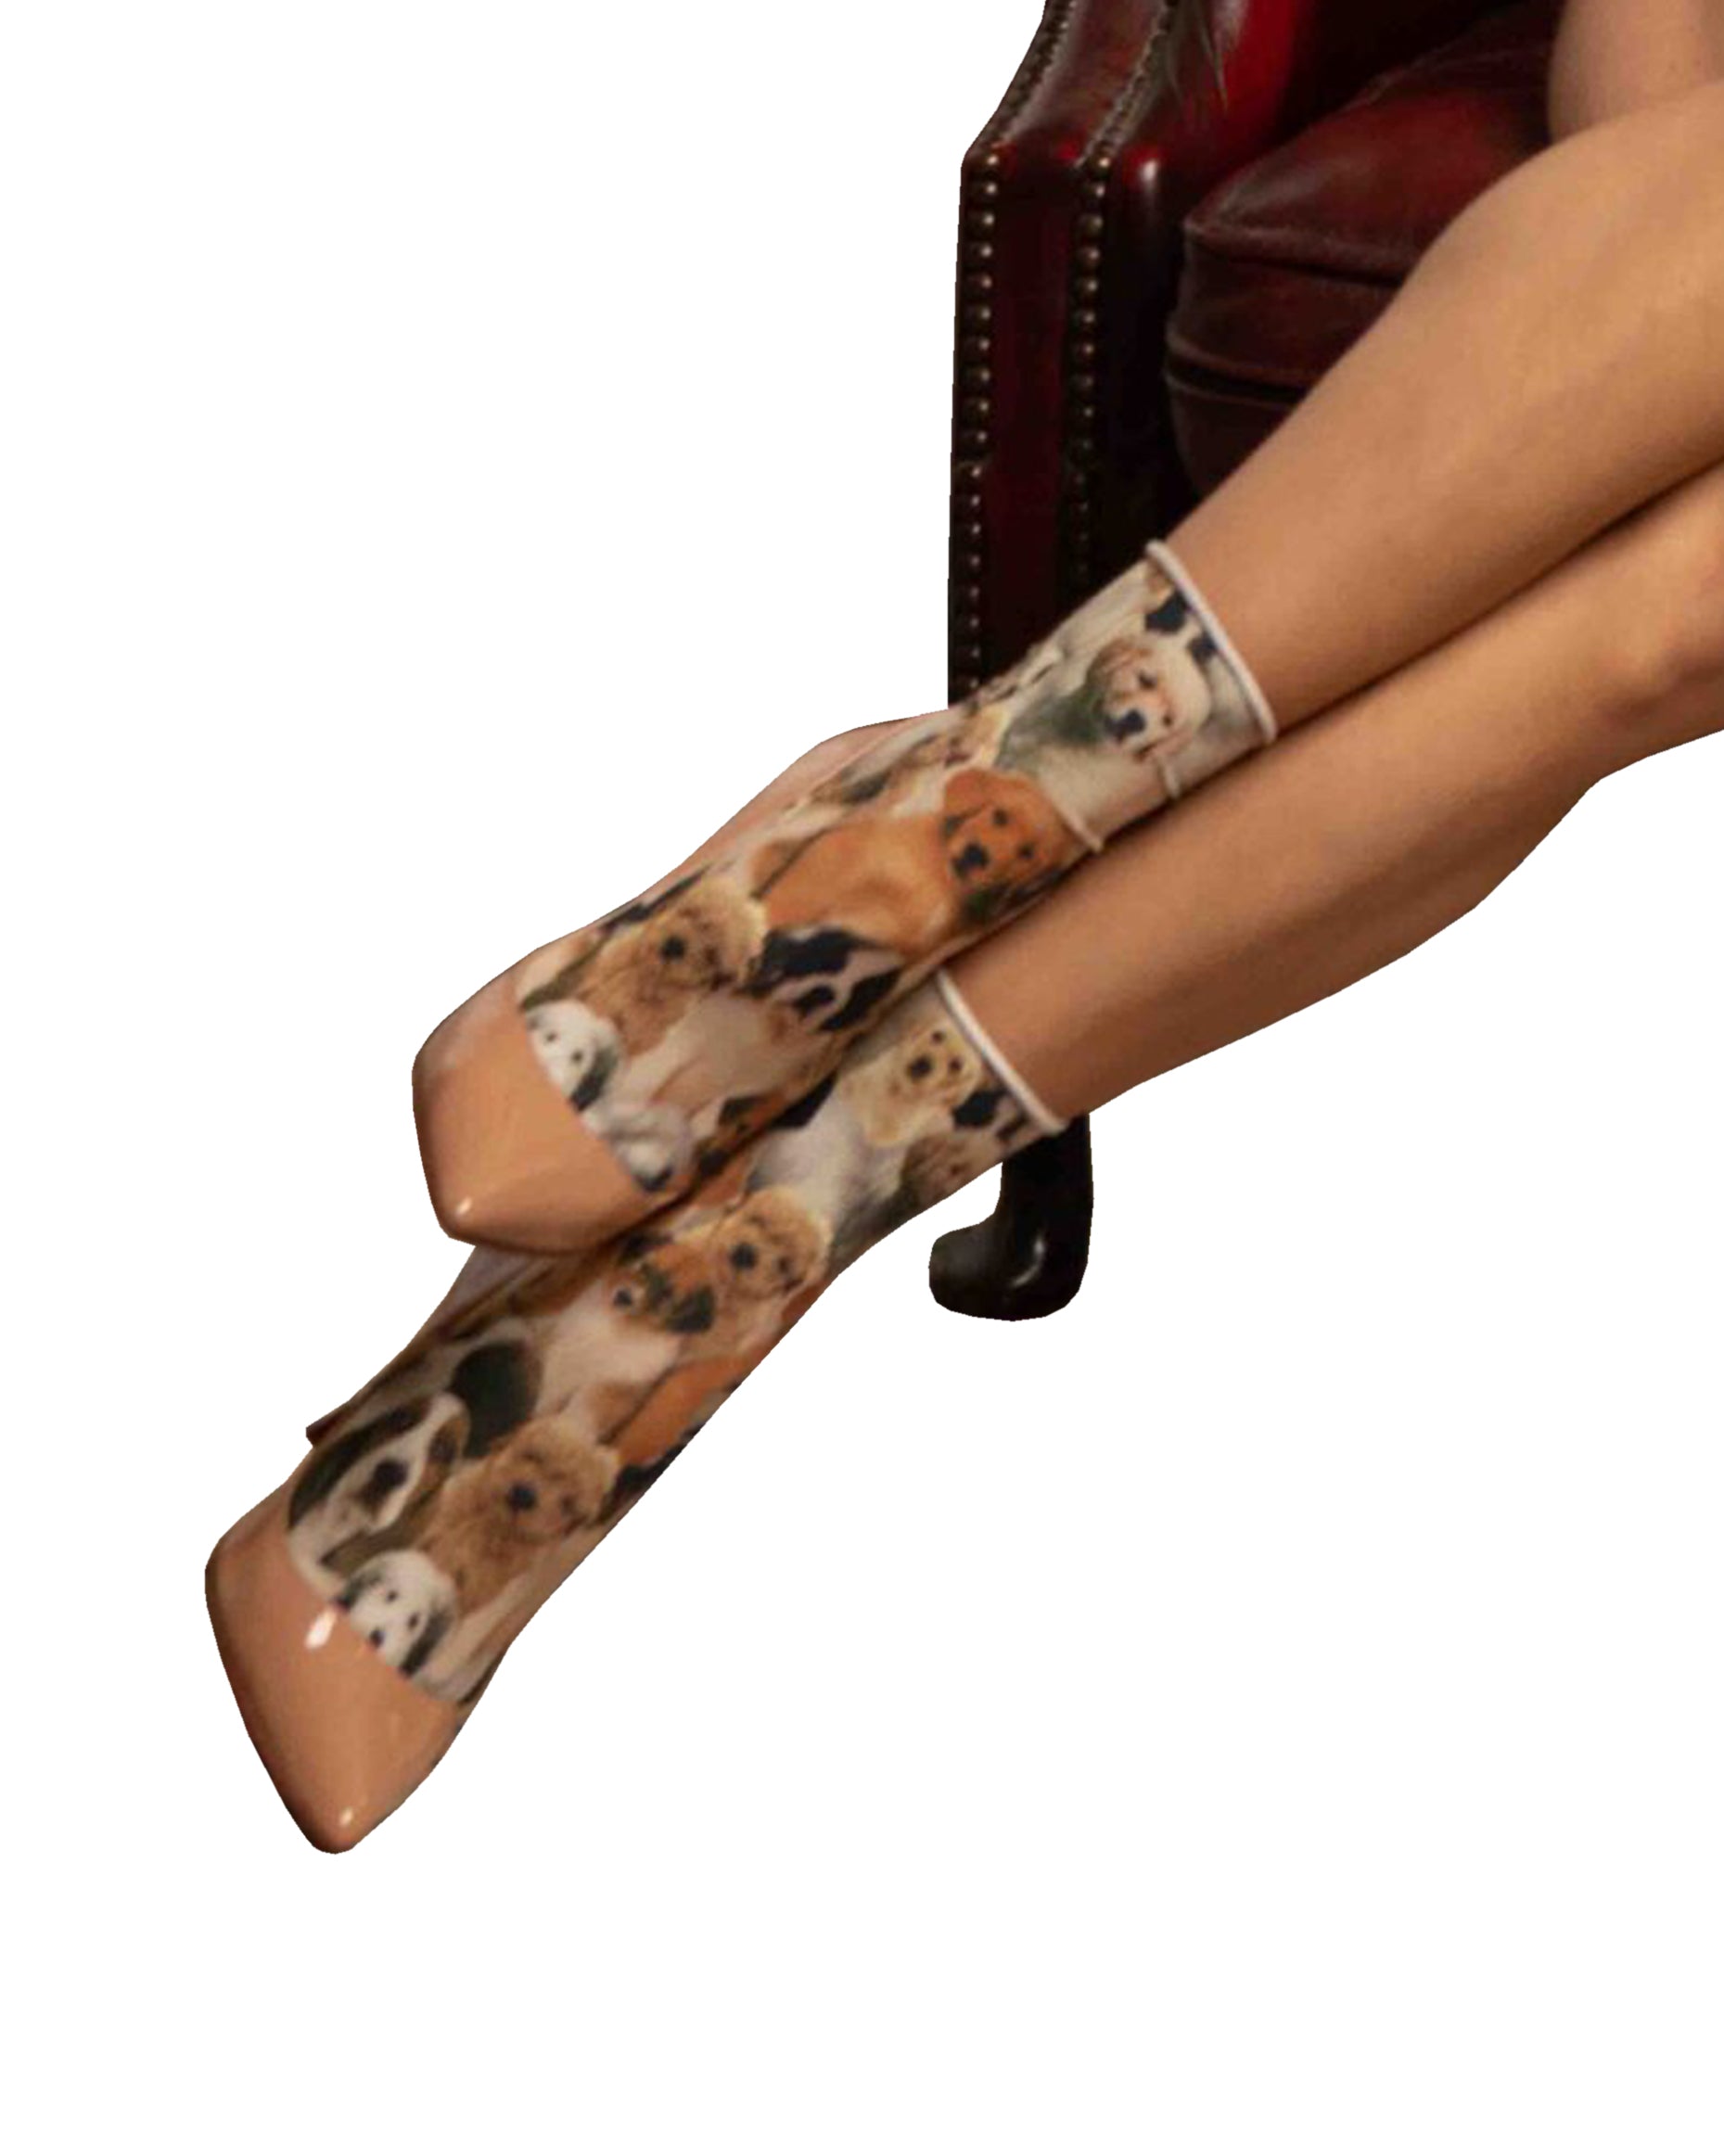 Omero Fantasy (Dog) Sock - Opaque fashion ankle socks with an all over digital print of assorted dogs in shades of beige, tan and browns.